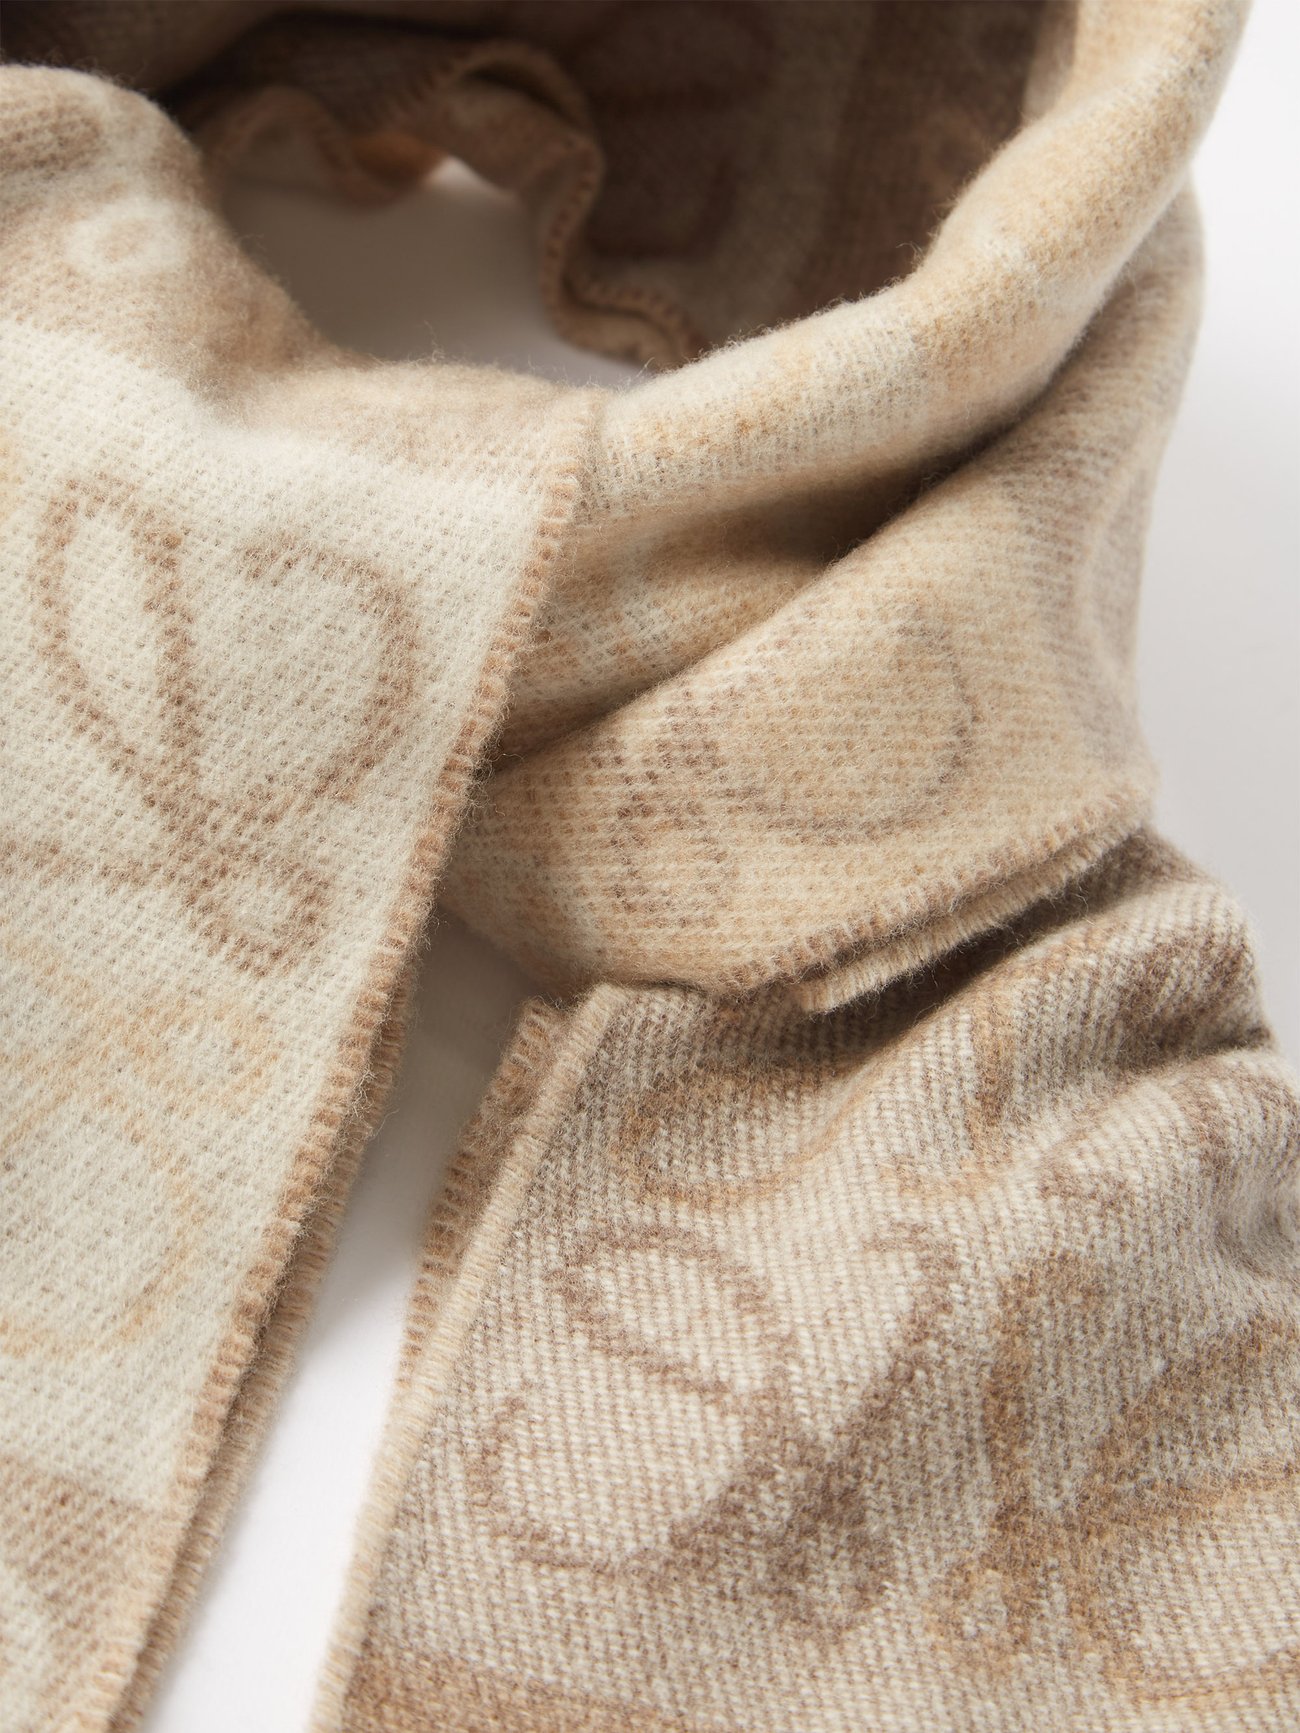 Loewe Women's Wool and Cashmere Scarf